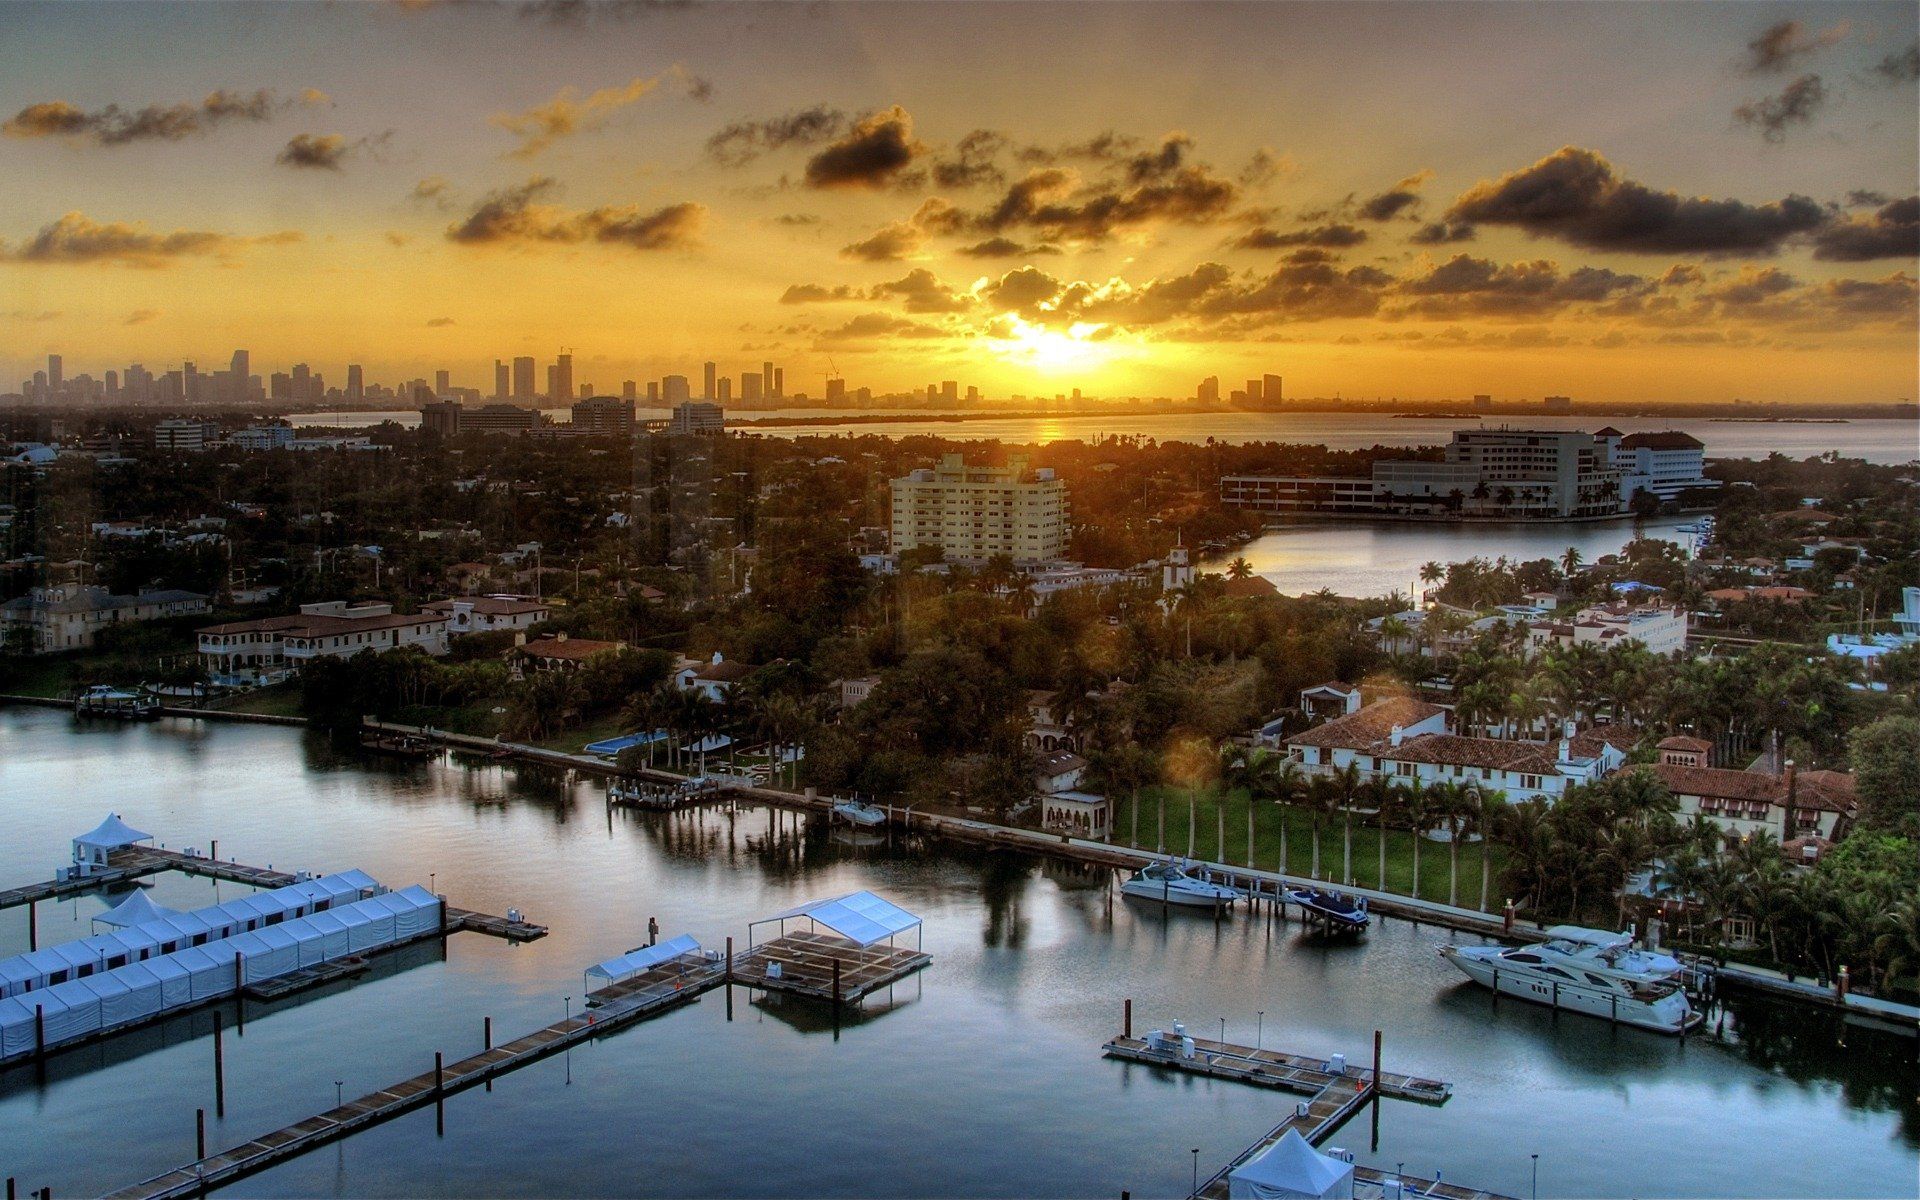 Miami sunset wallpaper - Towns wallpapers - Free wallpapers ...